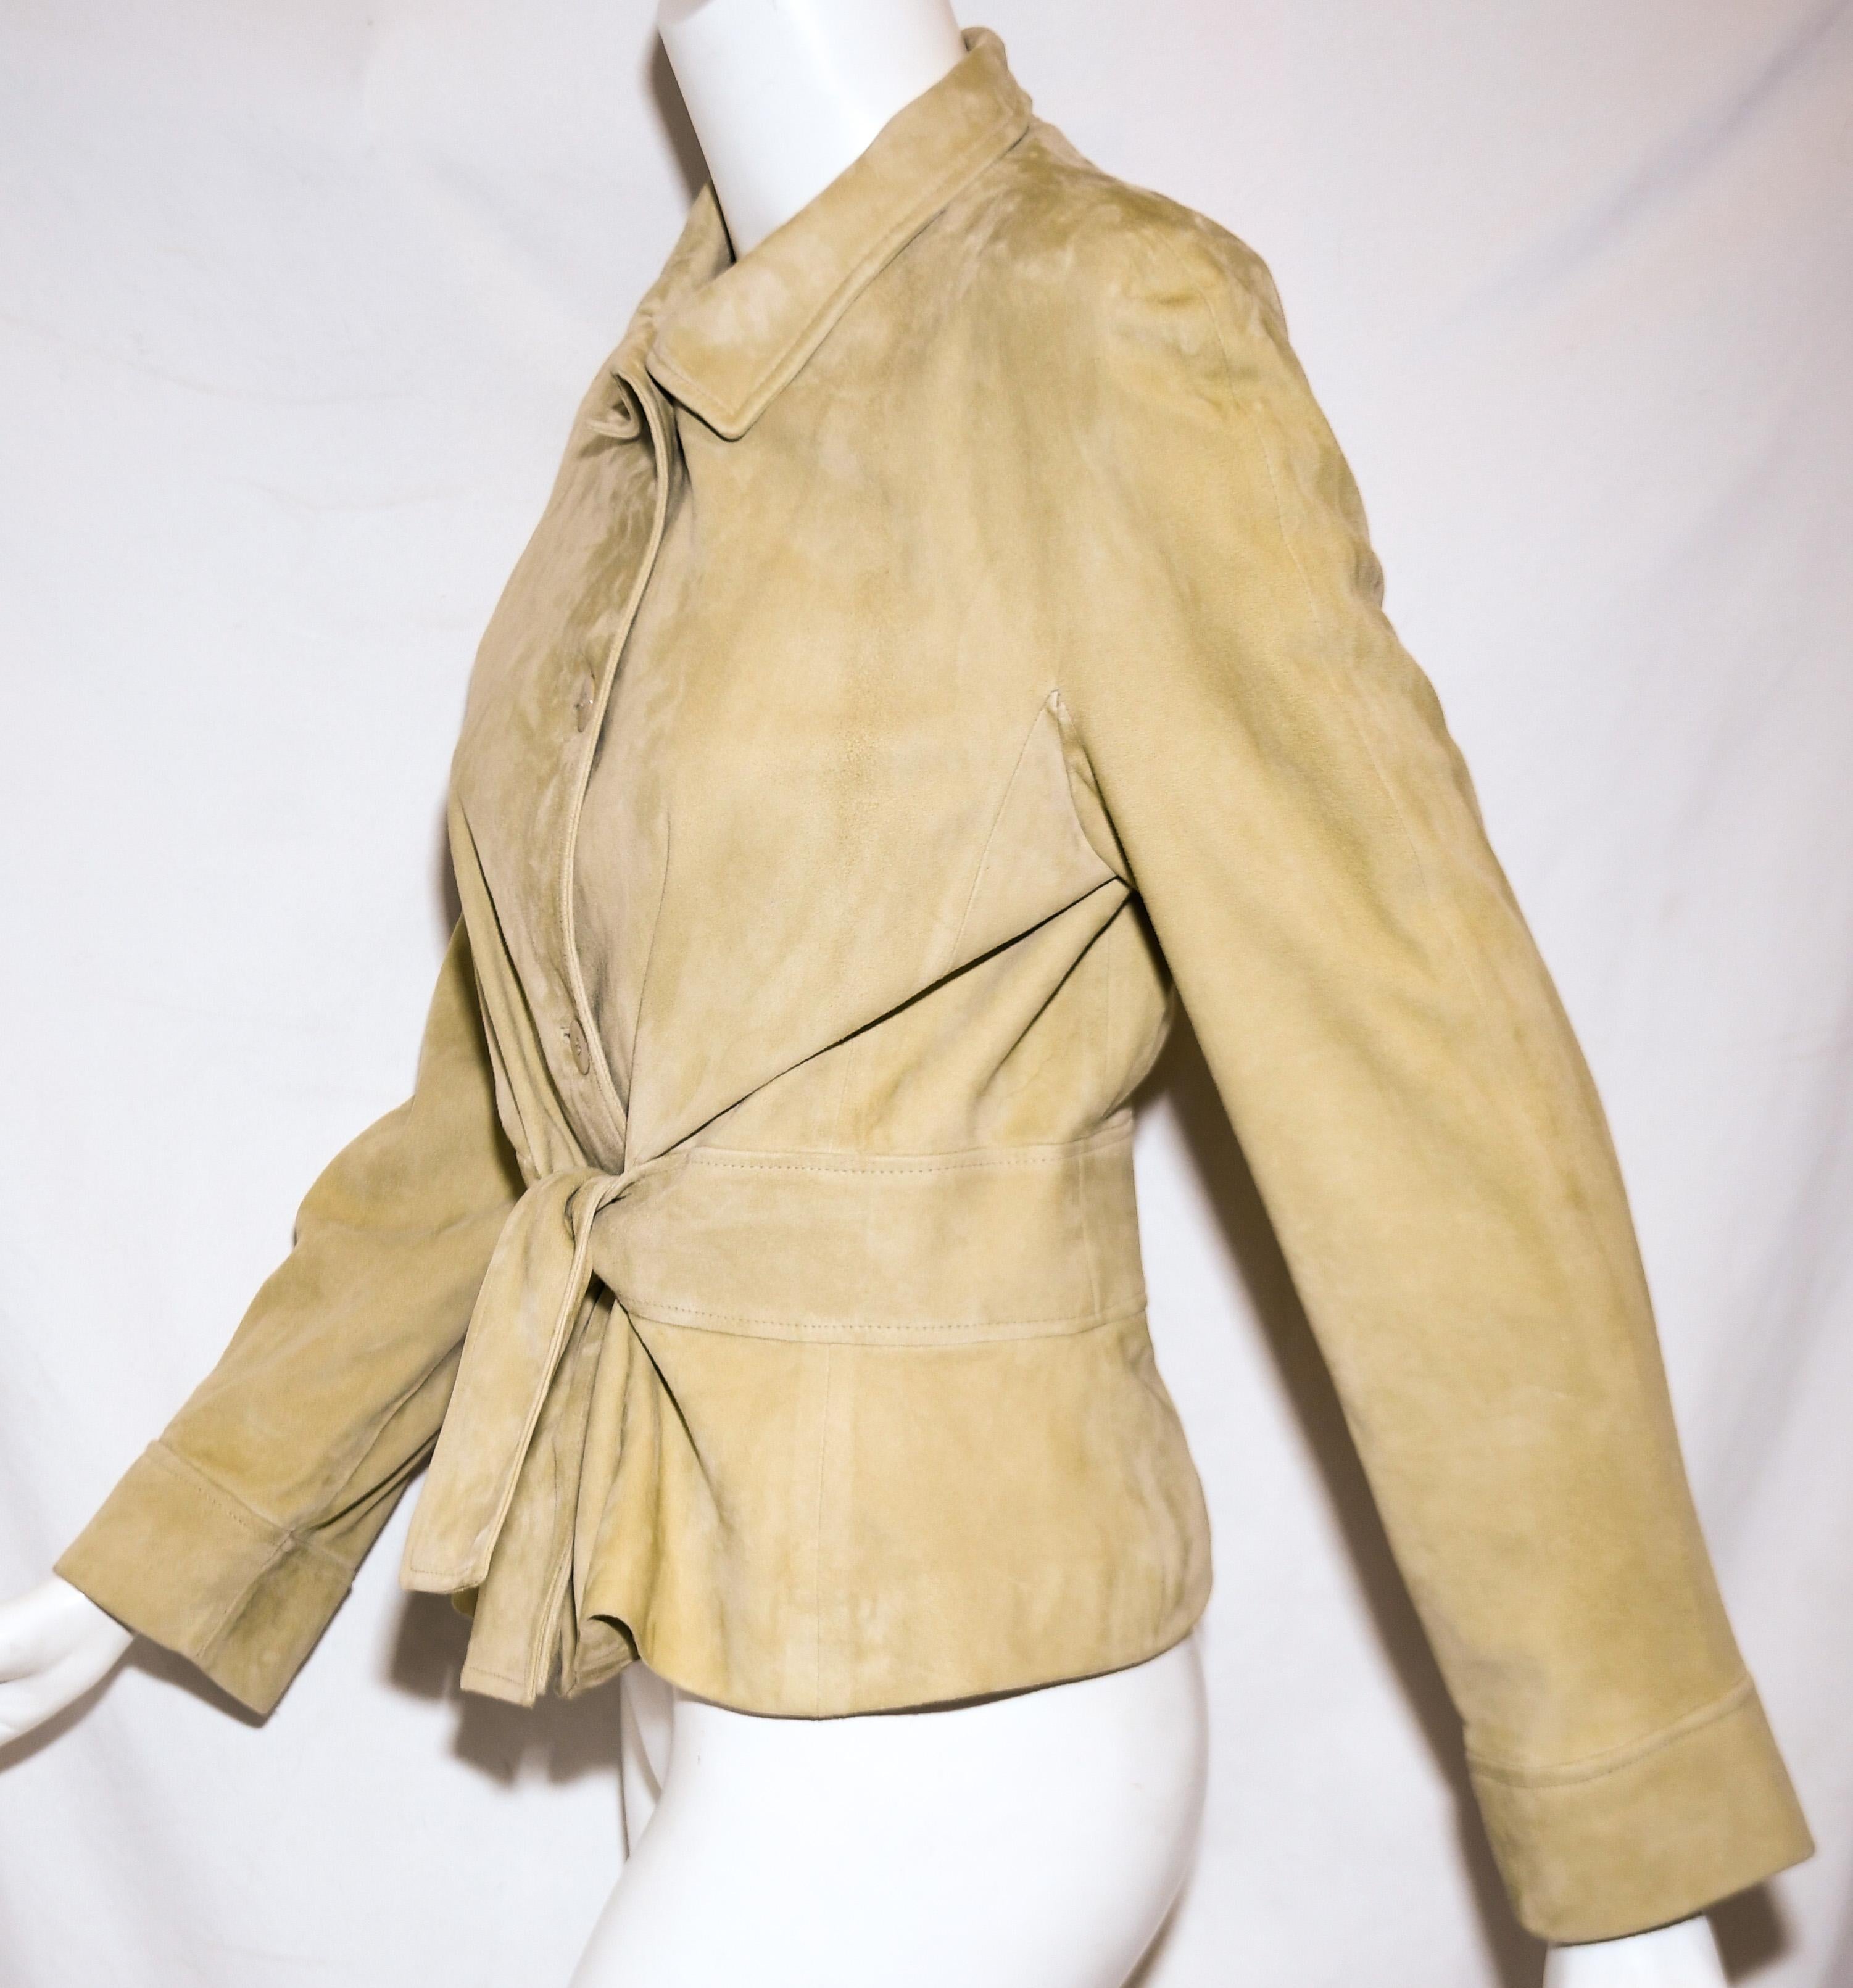 Valentino beige suede goat skin jacket includes an attached leather sash, at the waist, to be tied at front.  This jacket is lightweight and modern.  Jacket contains a shirt collar and 4 buttons at front for closure.  The jacket is fully lined in